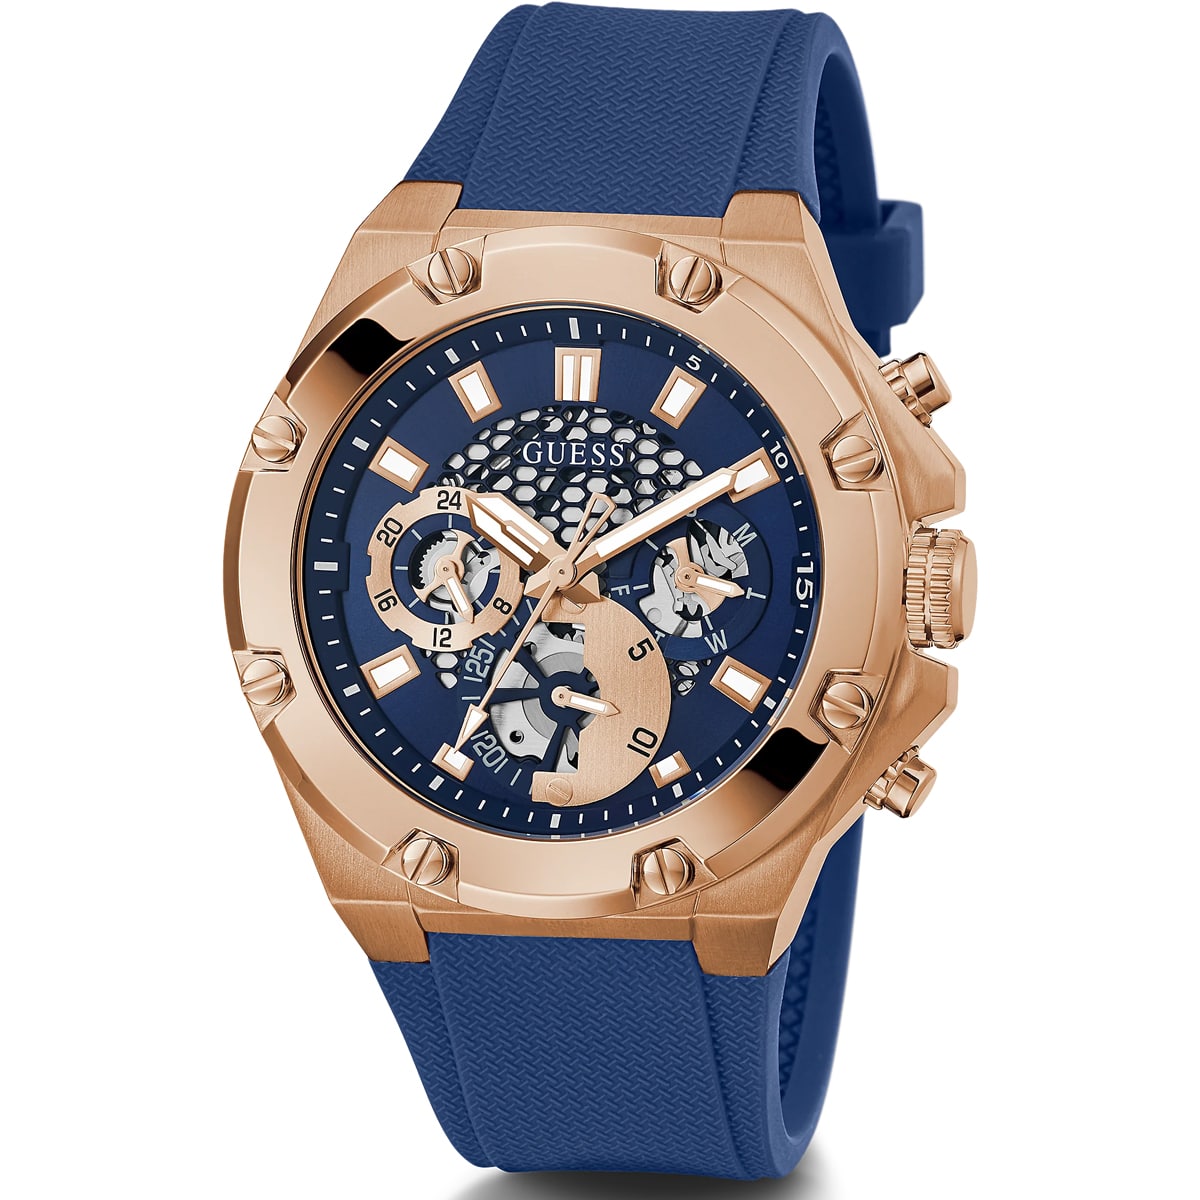 MONTRE GUESS THIRD GEAR HOMME M.FONCTION SILICONE